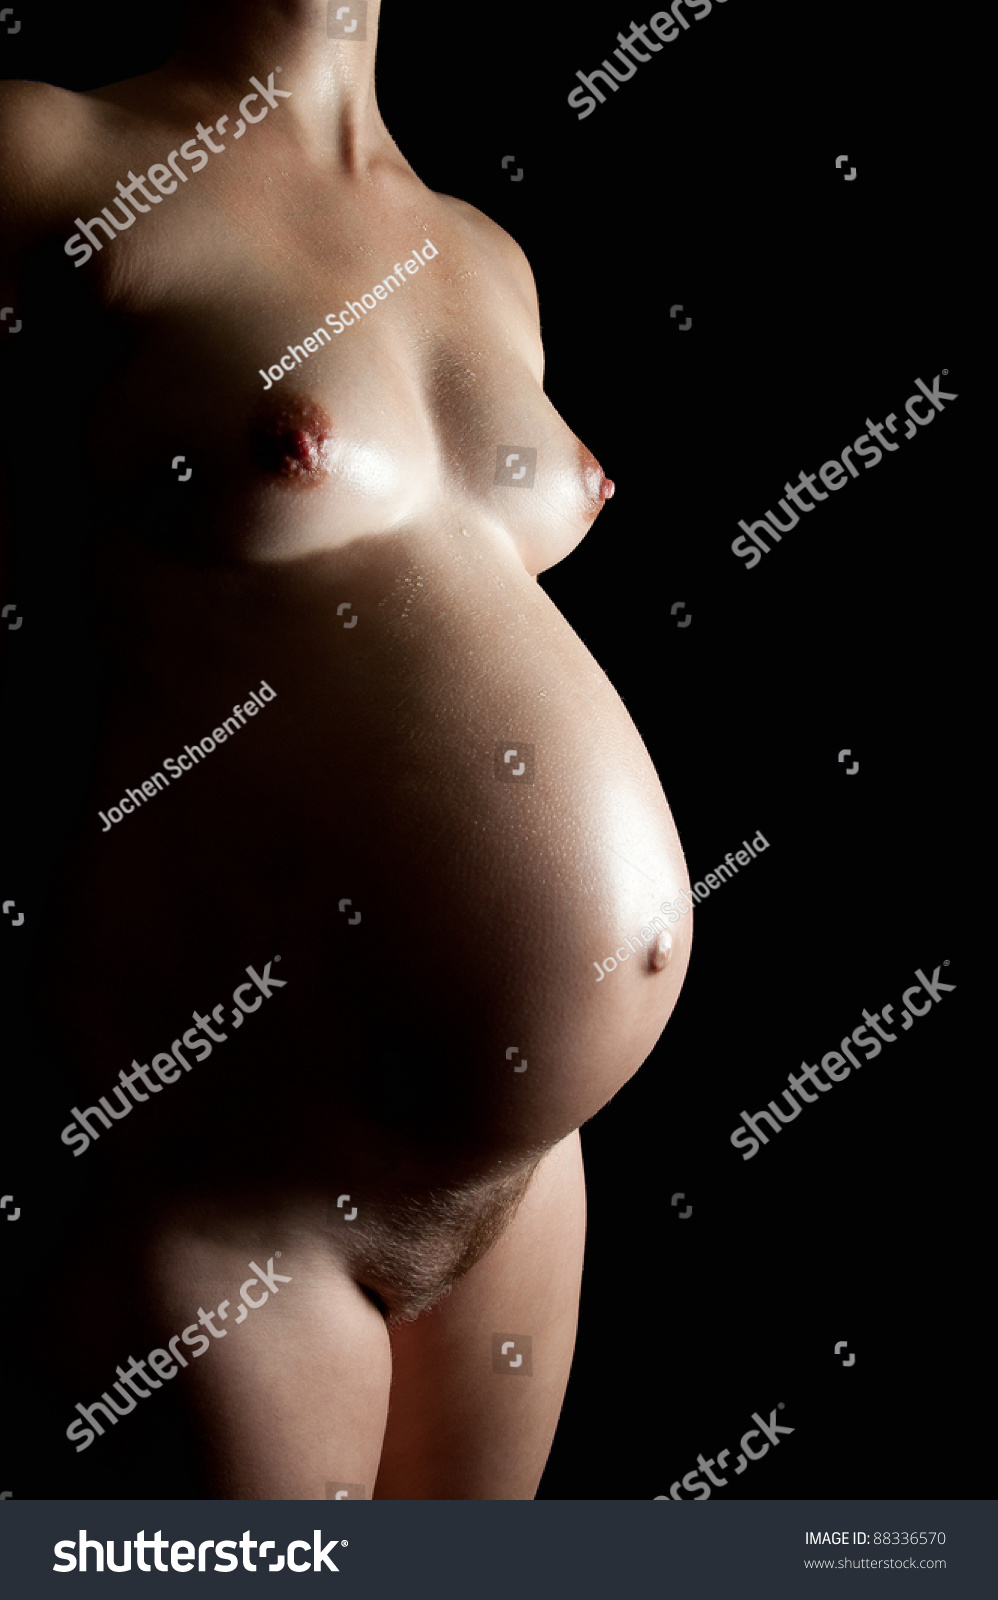 Nude Pregnant Female Full Front Back